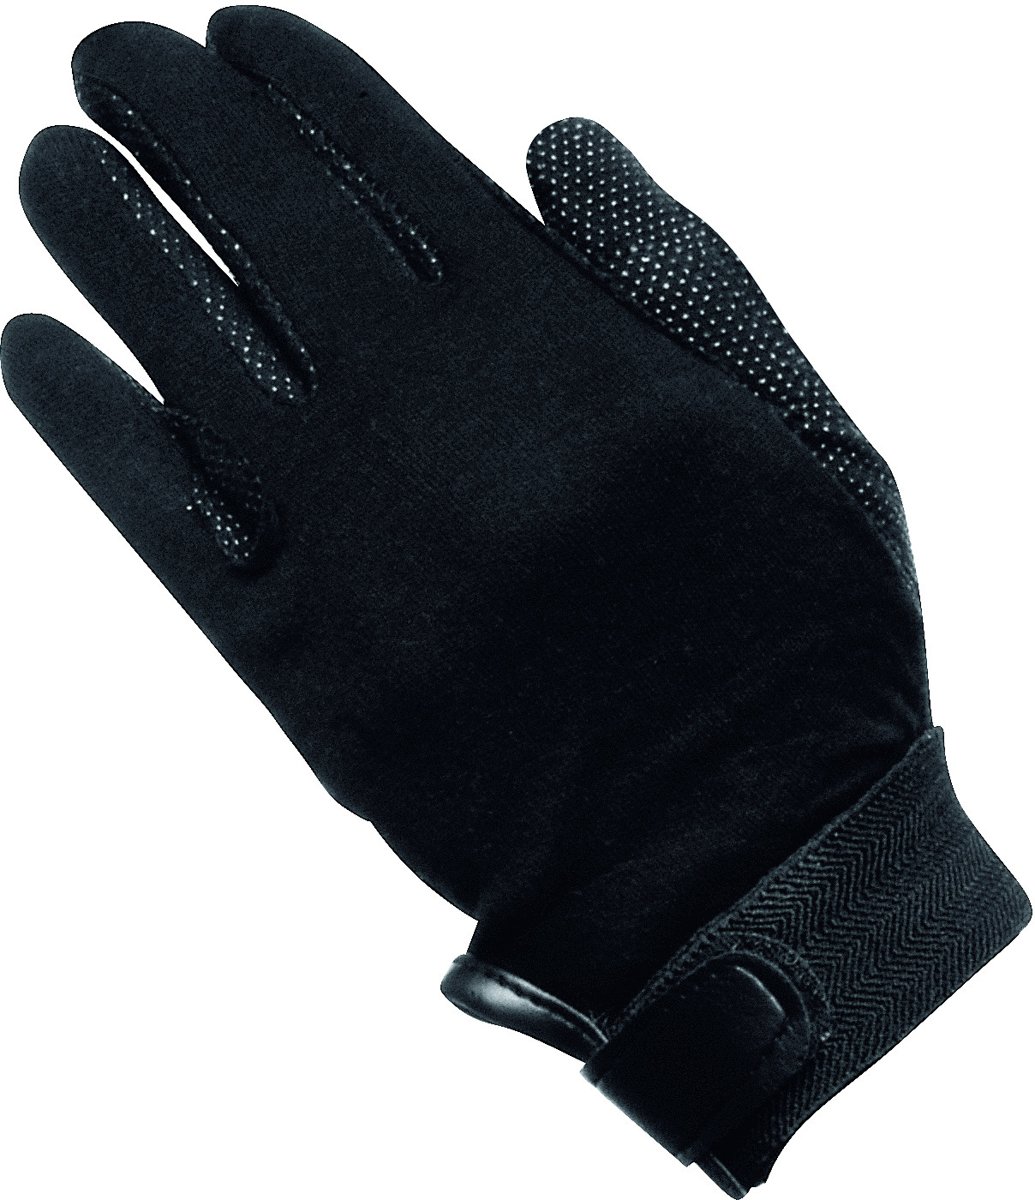 Knit-Cotton Gloves Picot black 10-12 years